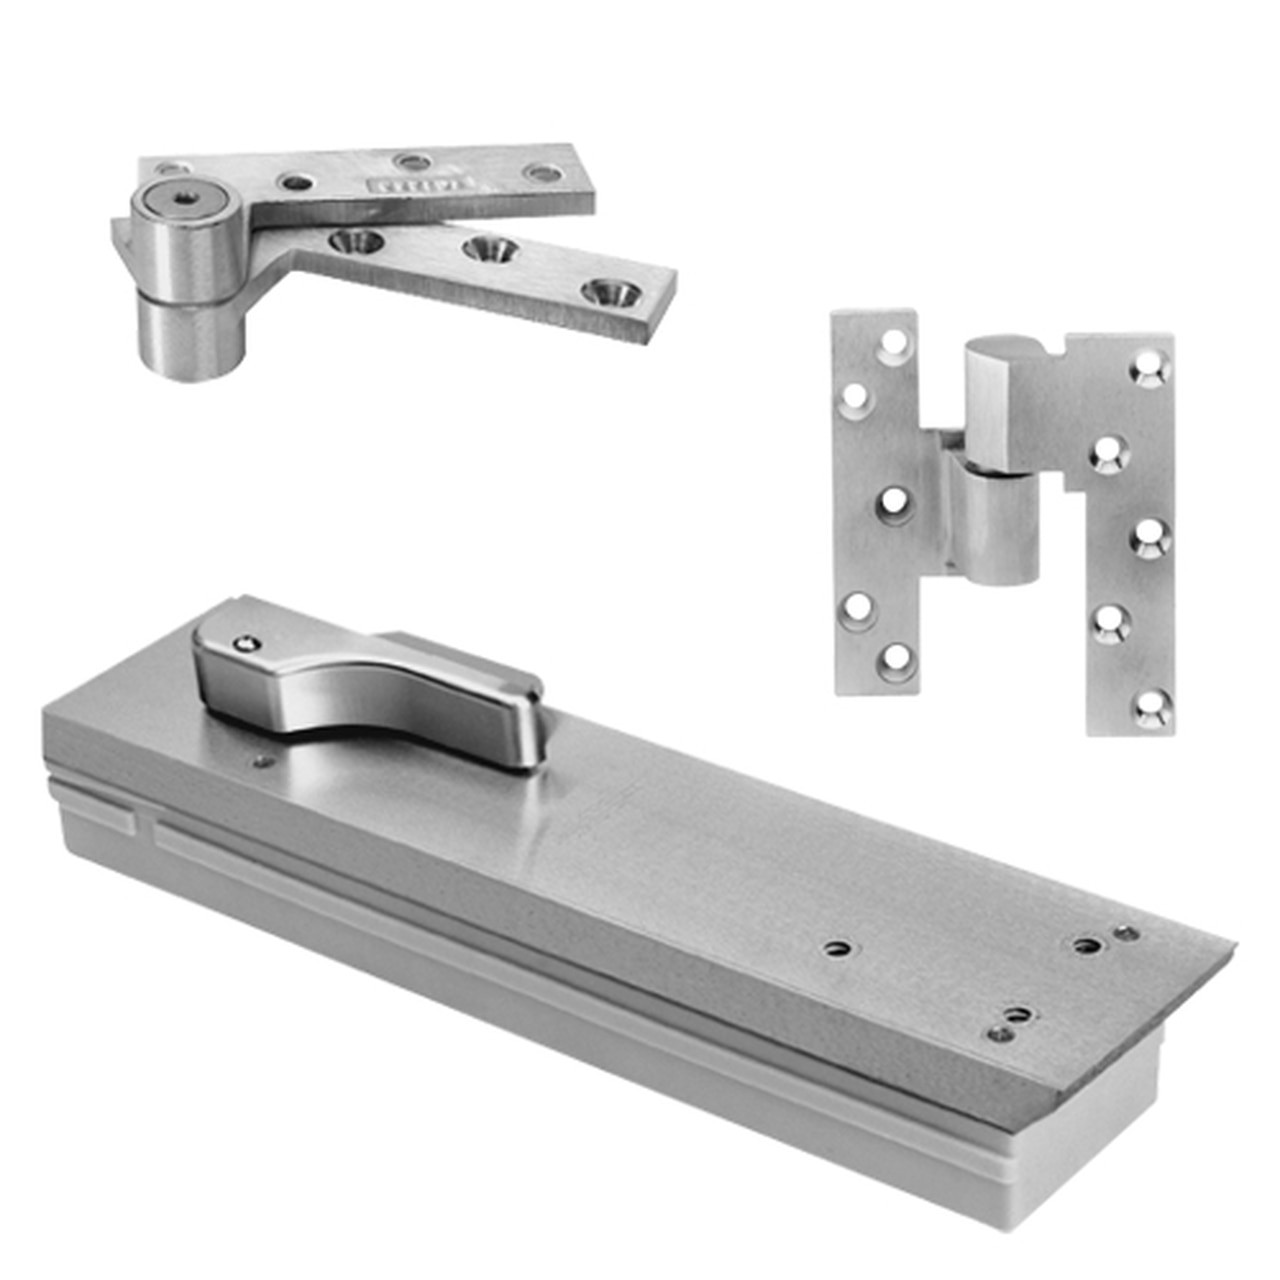 FQ5103NBC-SC-RH-626 Rixson Q51 Series Fire Rated 3/4" Offset Hung Shallow Depth Floor Closers in Satin Chrome Finish